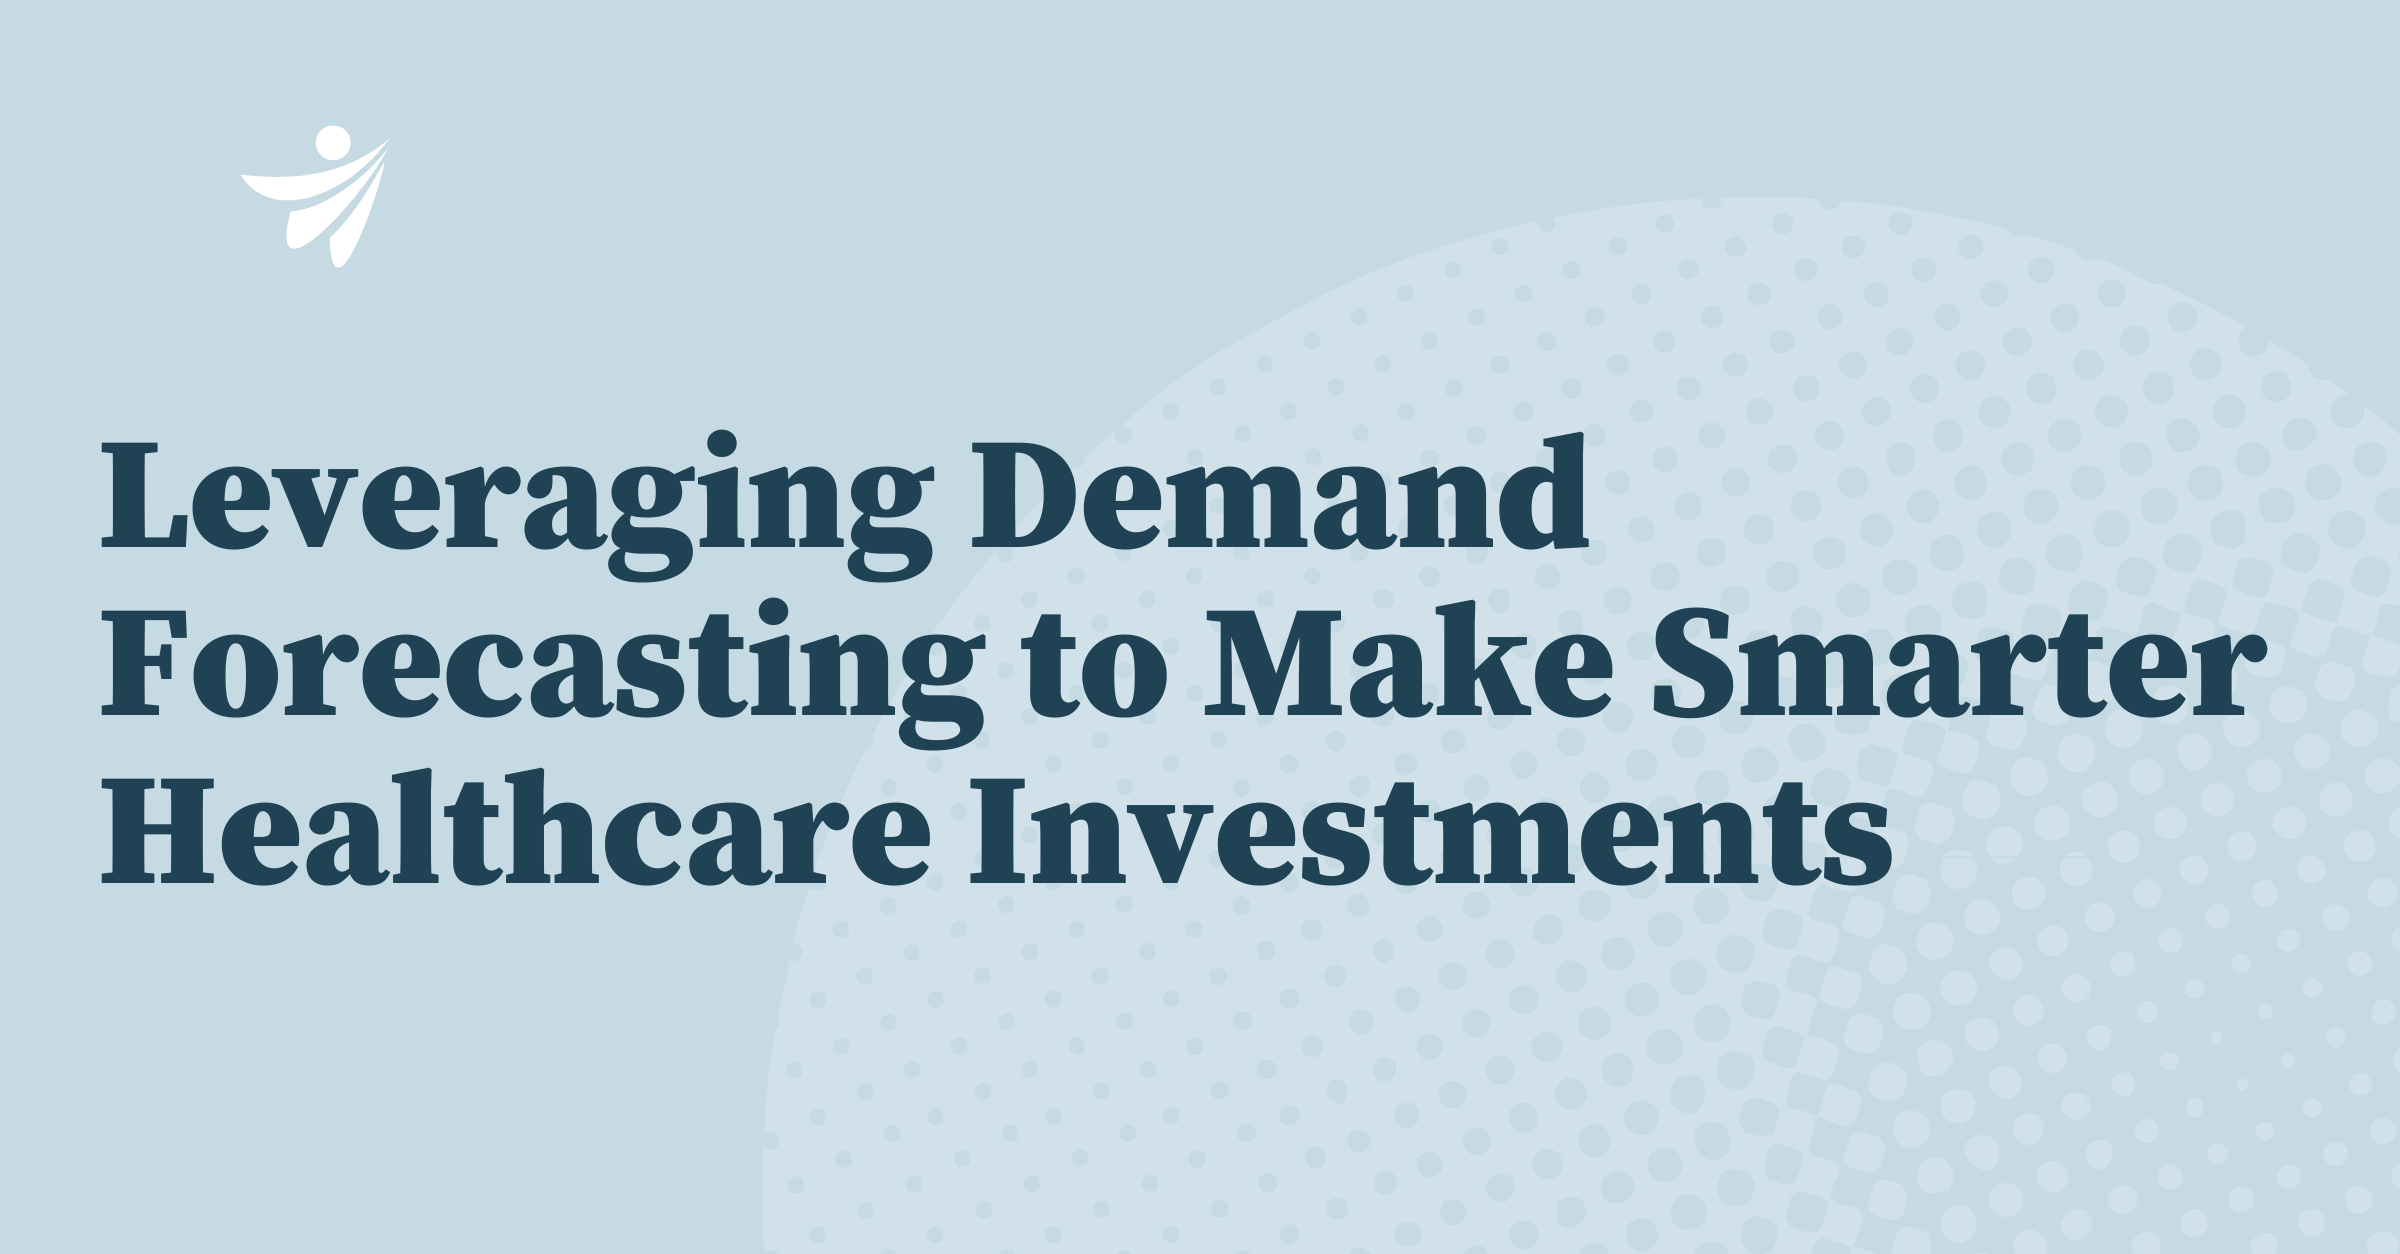 Thumbnail for Leveraging demand forecasting to make smarter healthcare investment decisions